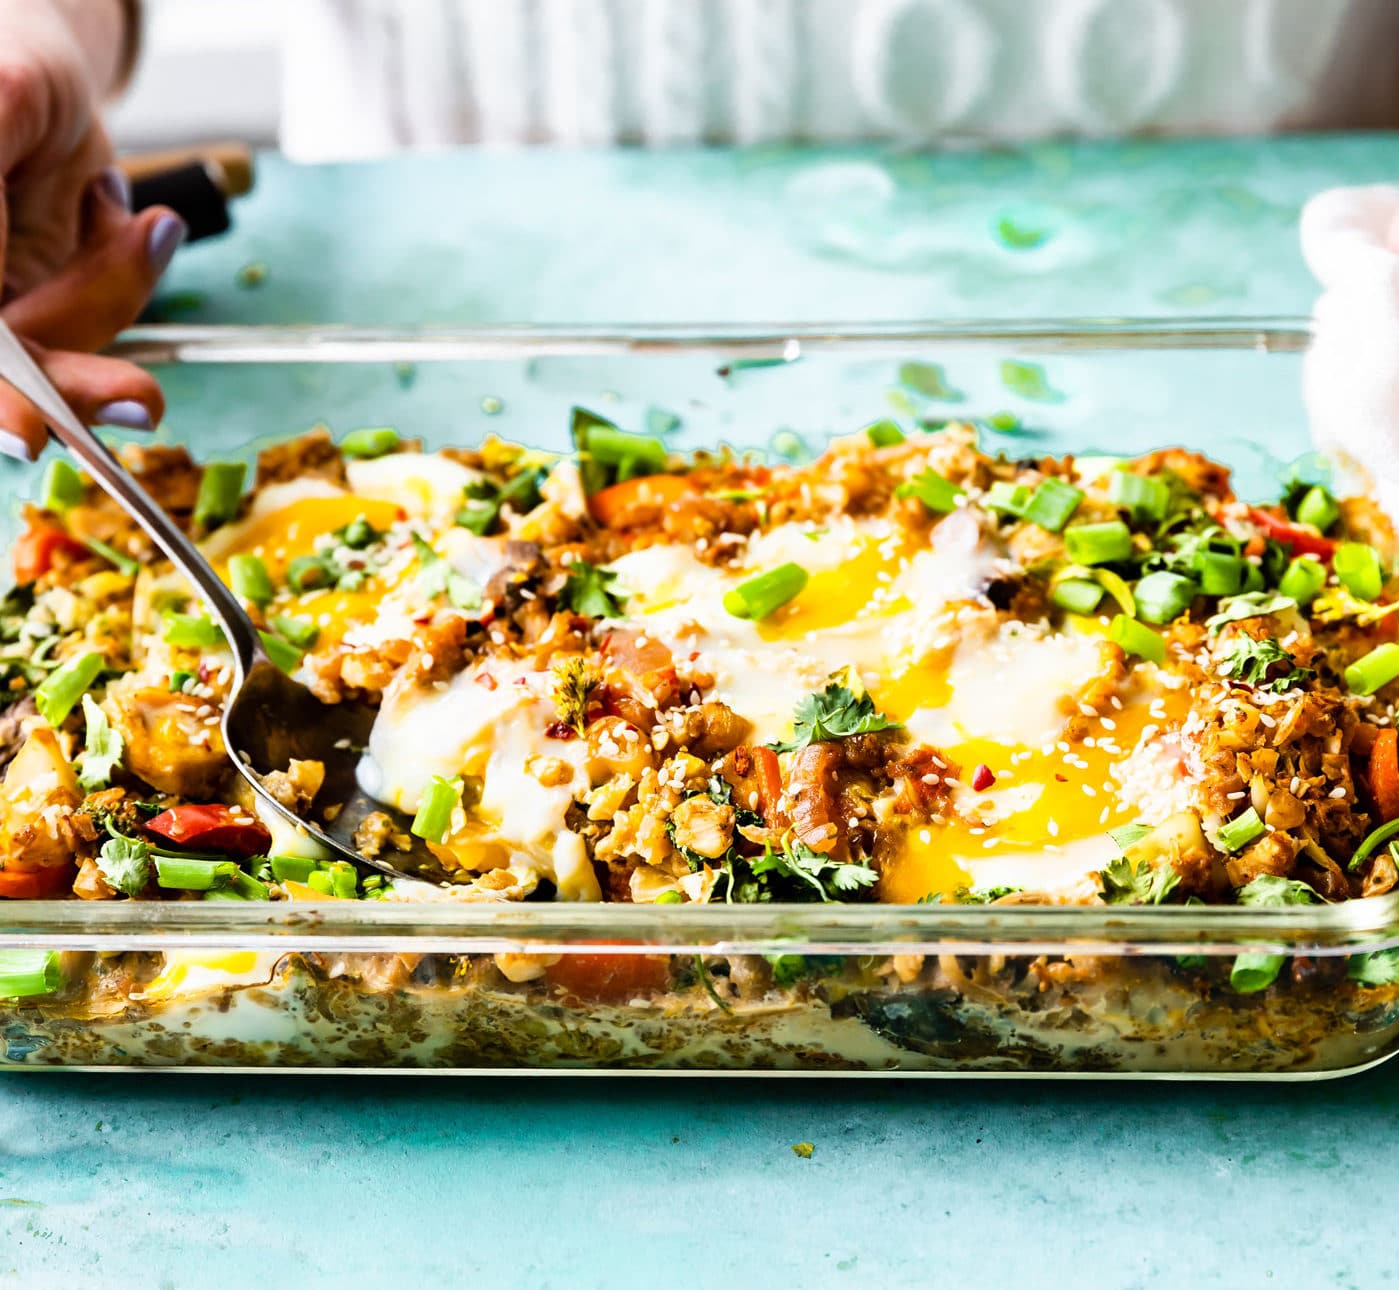 Side view of baking dish filled with cauliflower fried rice with baked eggs on top.